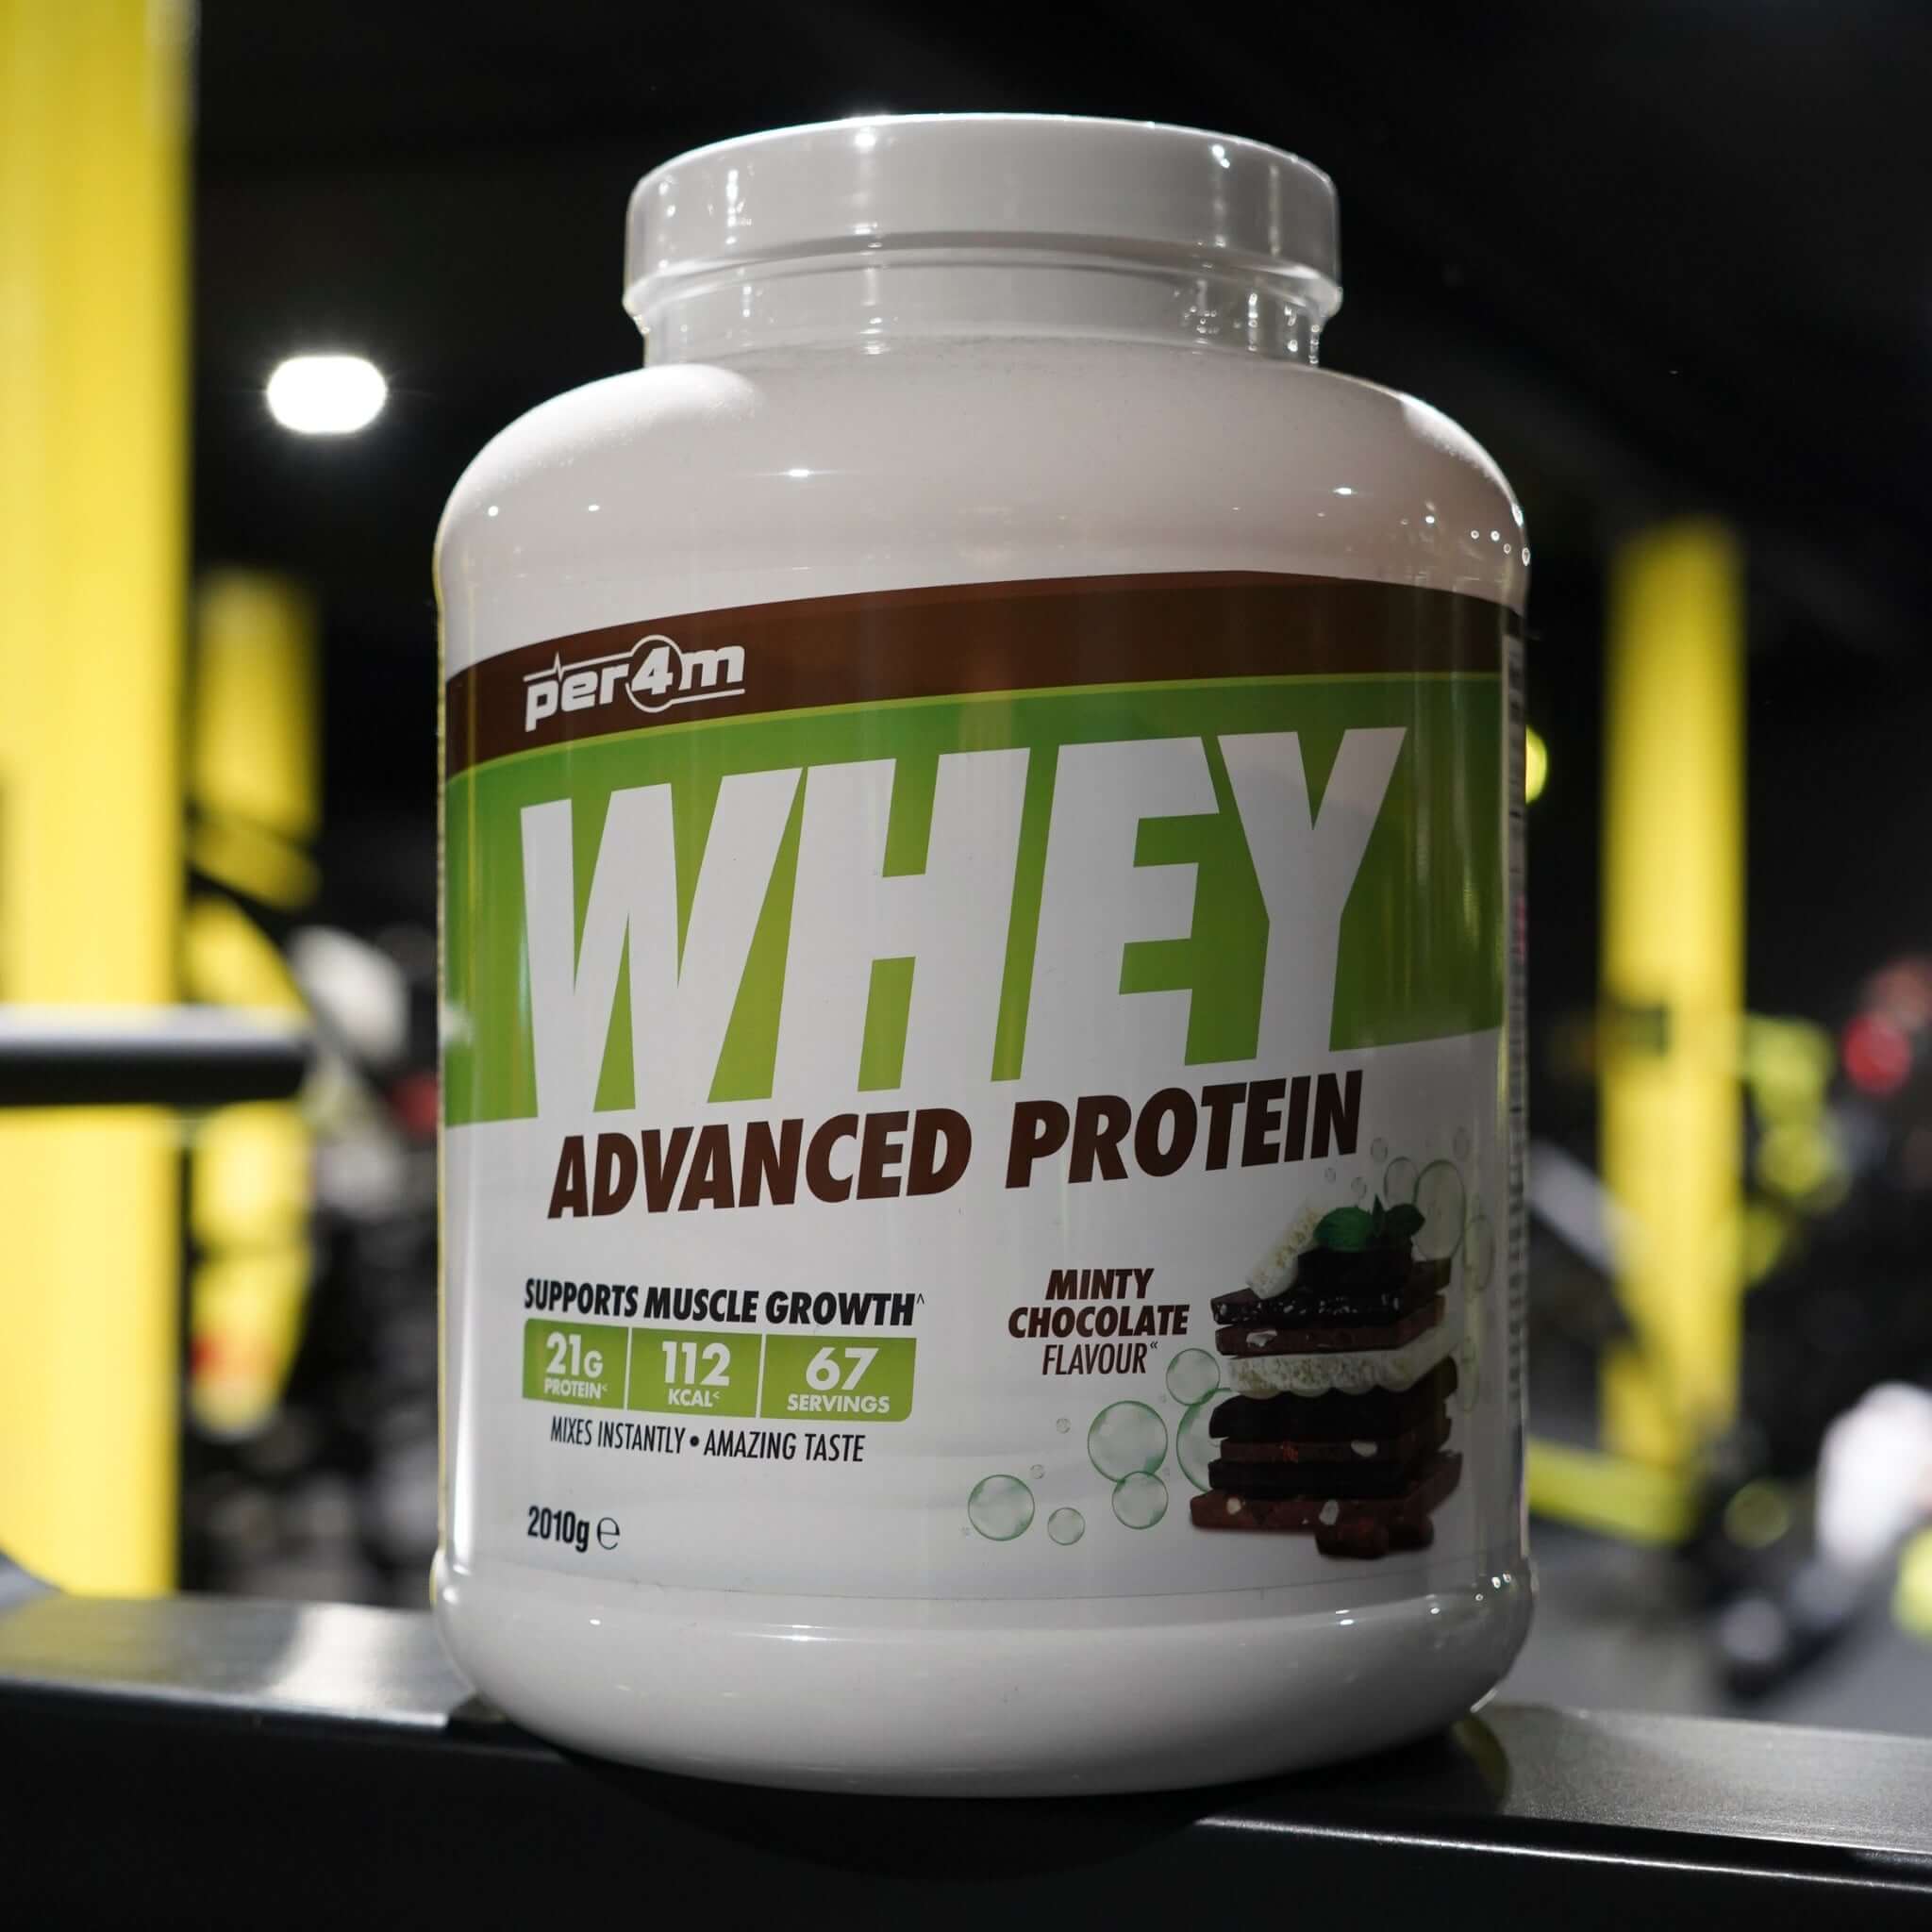 Per4m Whey Advanced Protein Minty Chocolate Flavour